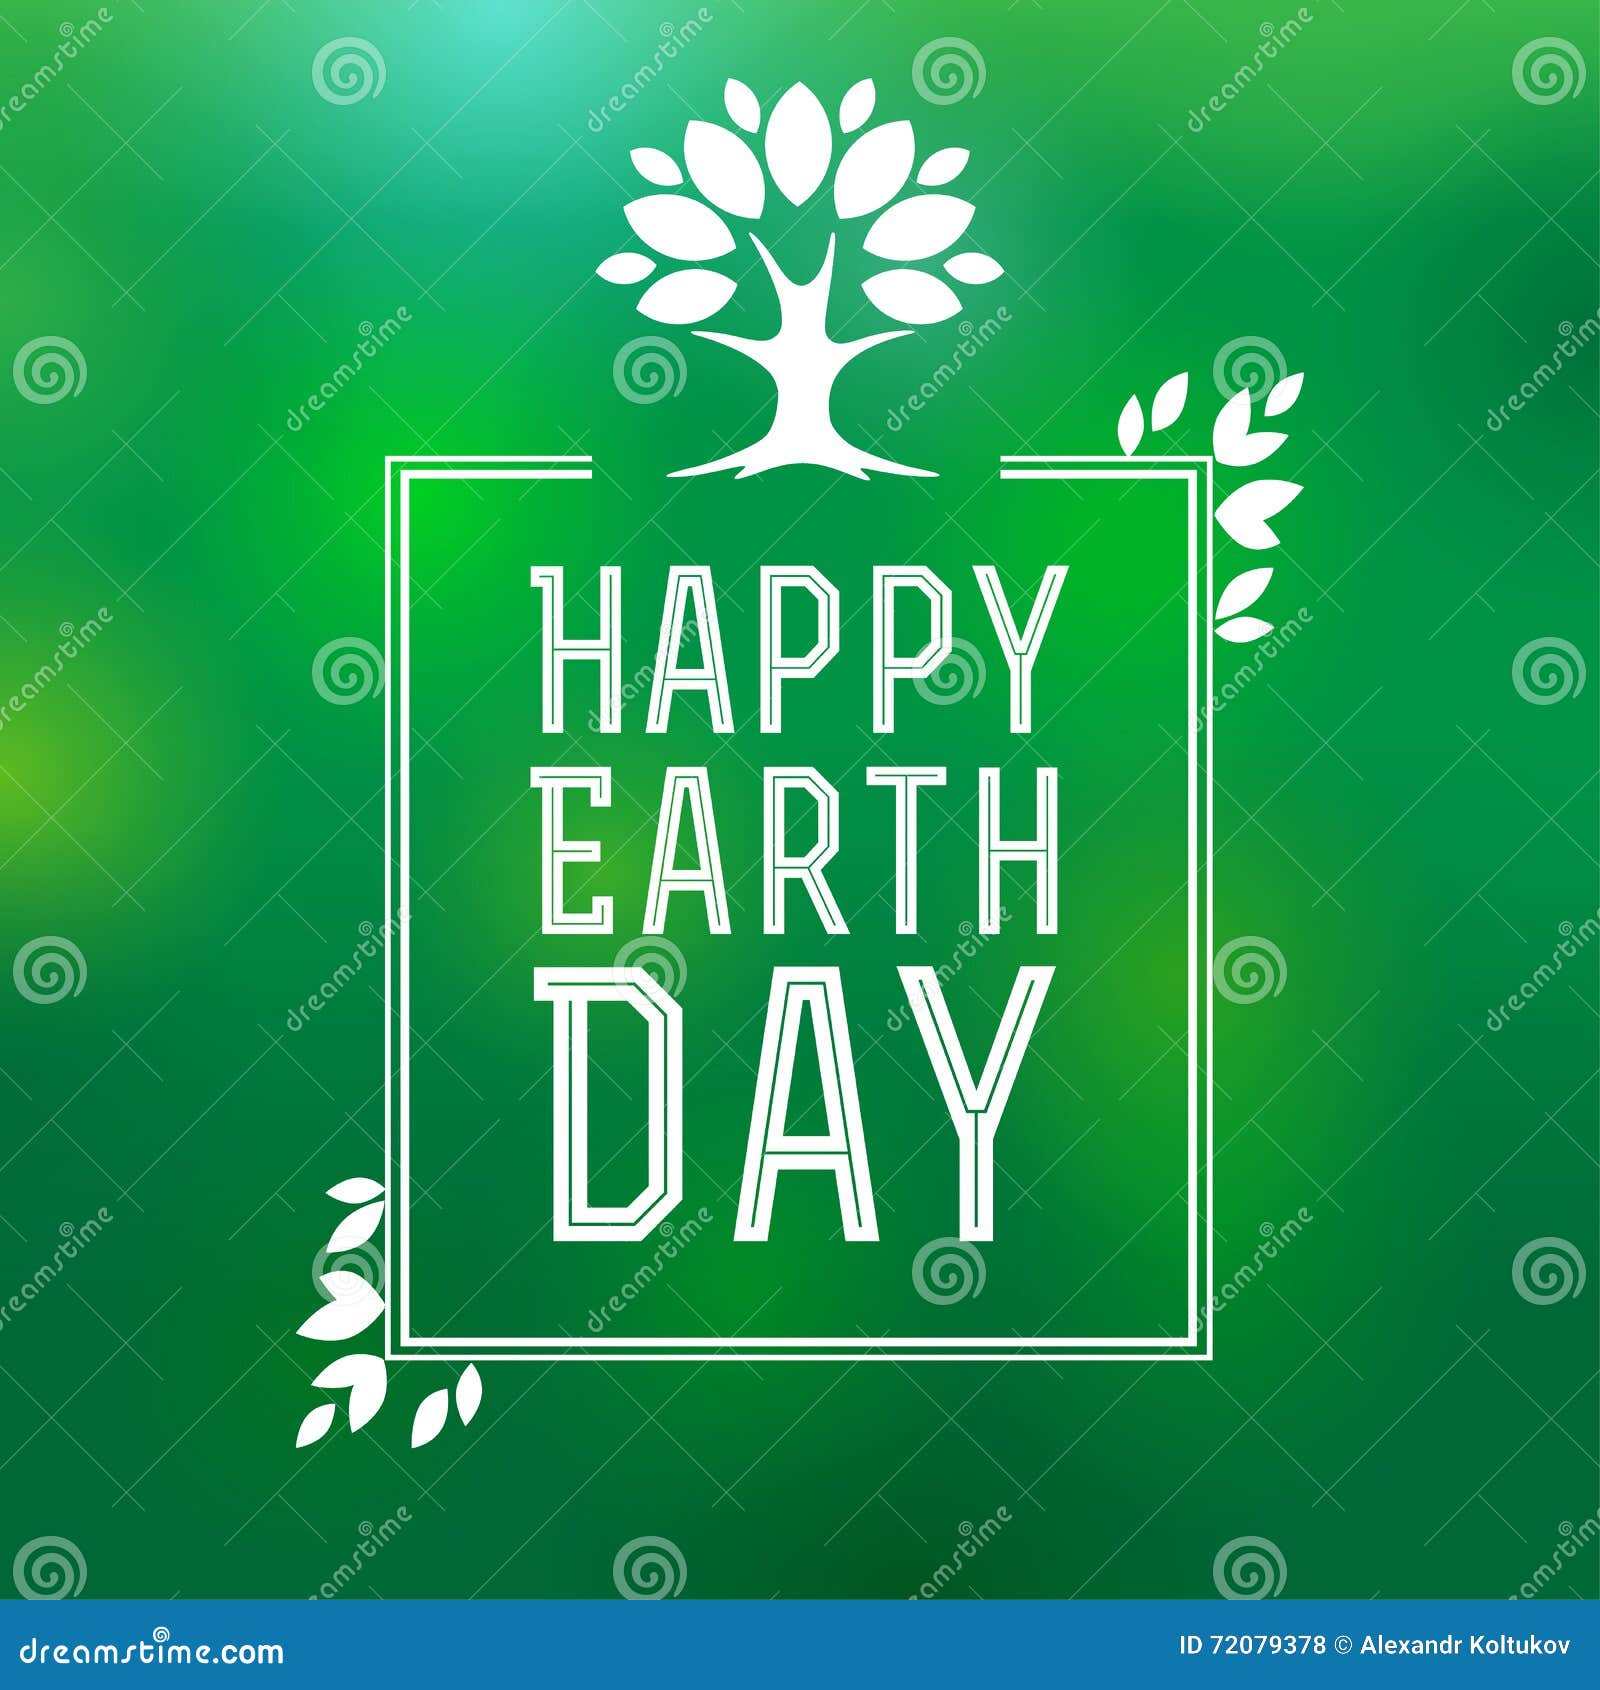 Happy Earth Day stock vector. Illustration of background 72079378